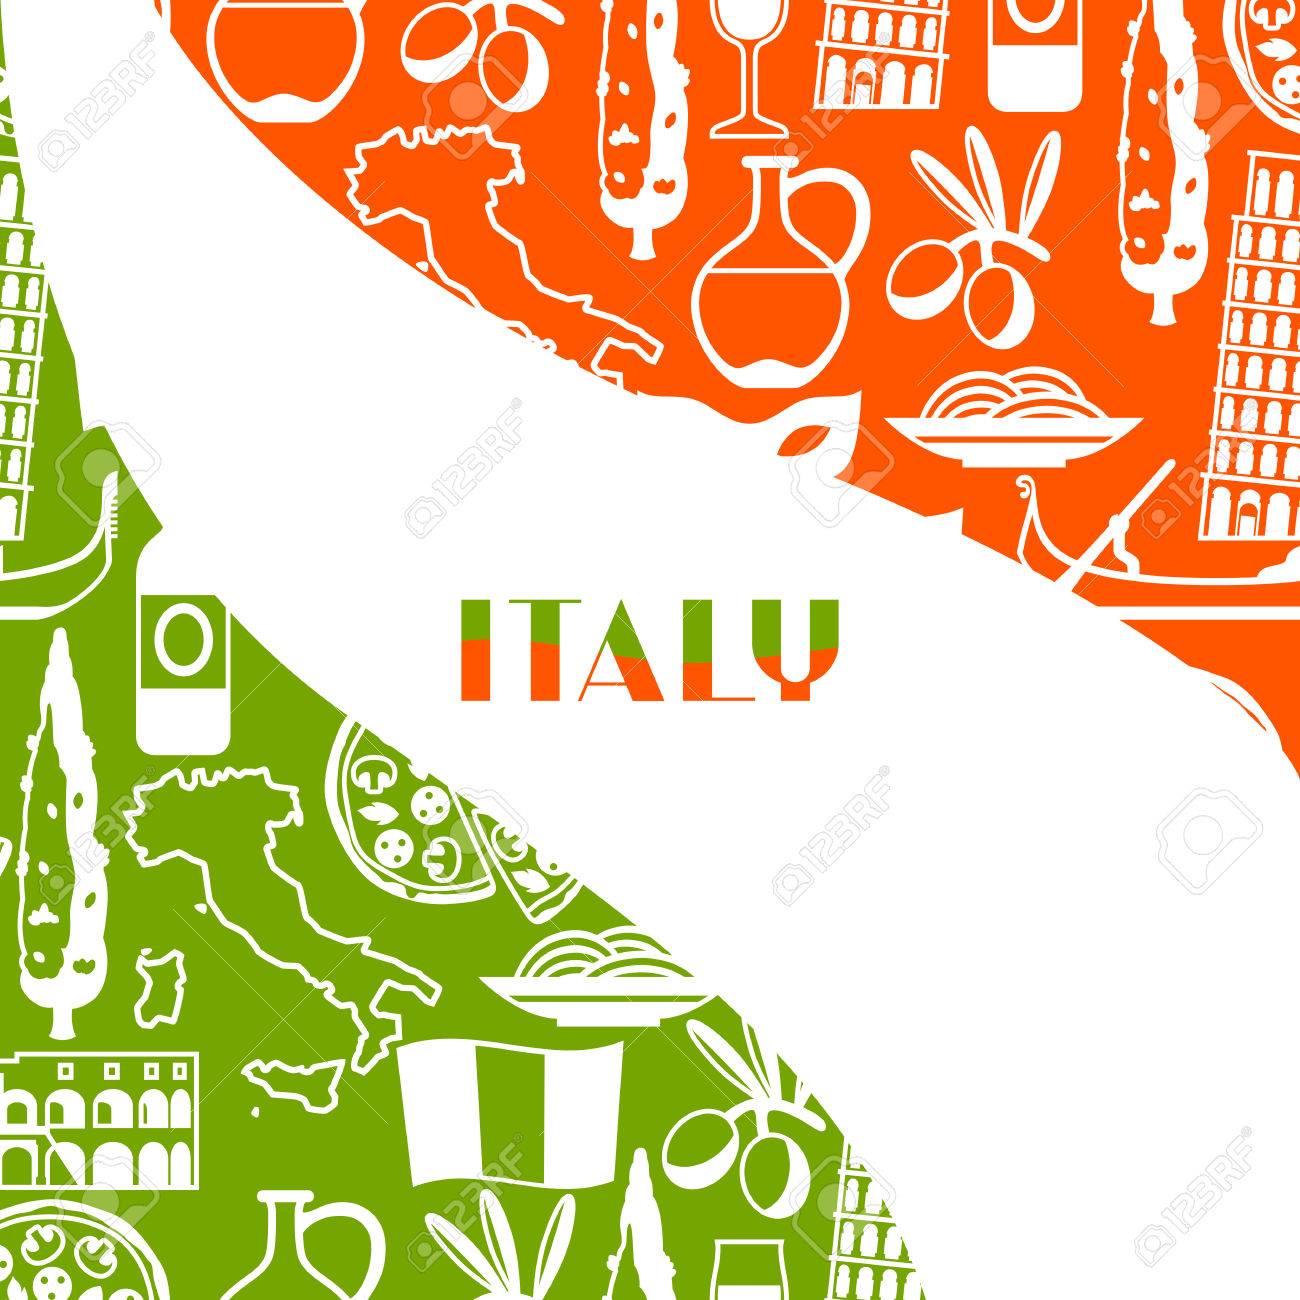 Italy Background Design Italian Symbols And Objects Royalty Free